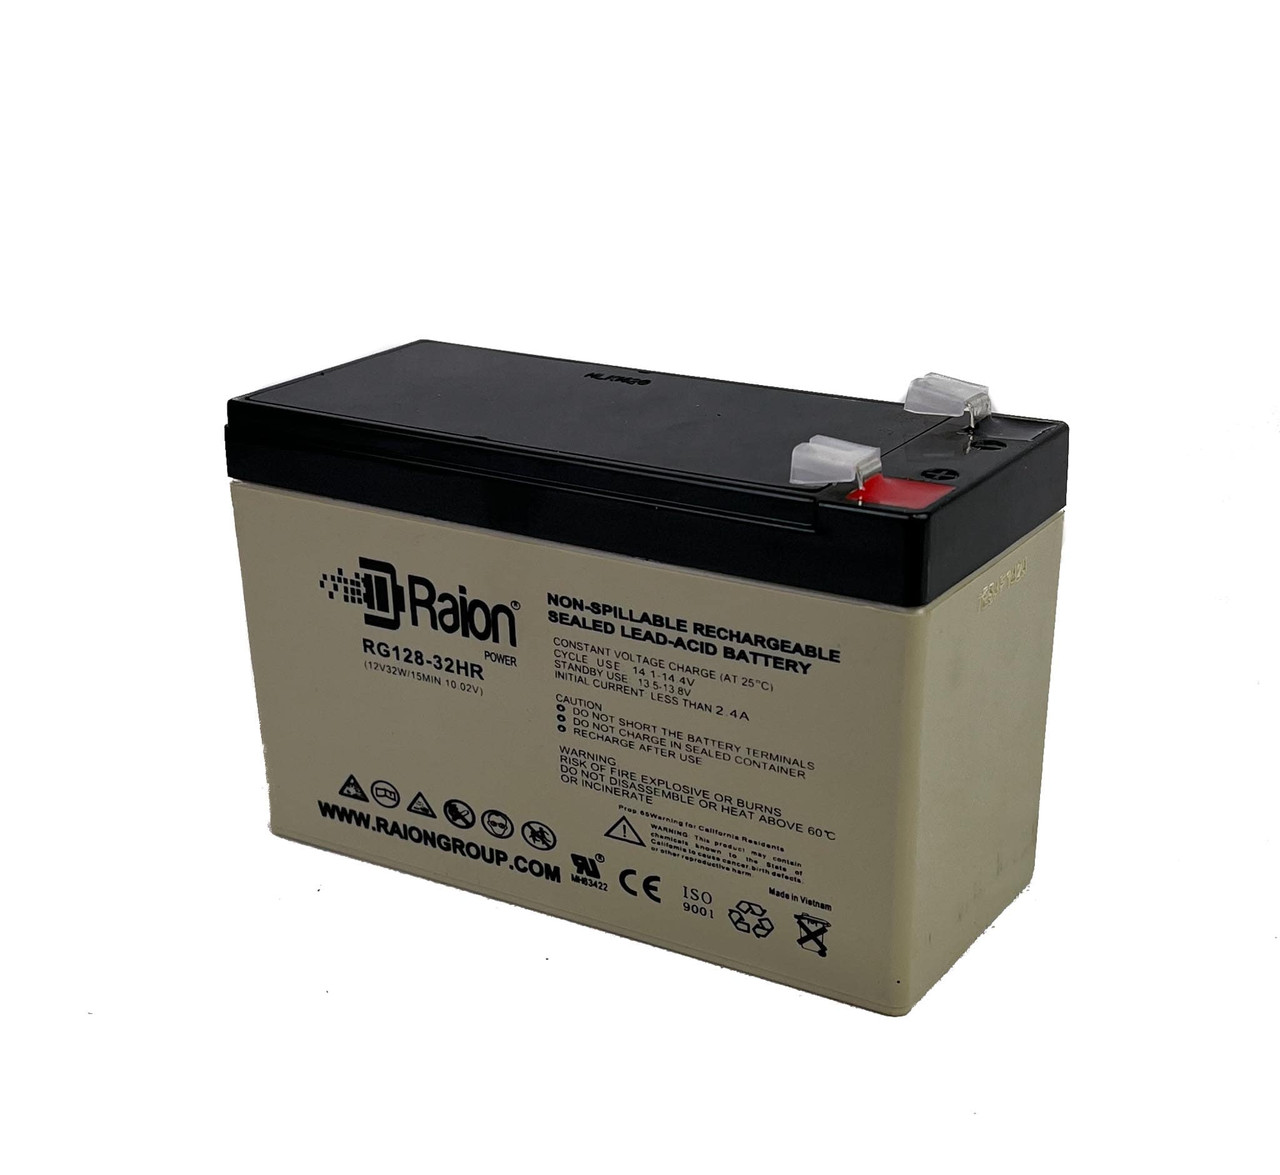 Raion Power RG128-32HR 12V 7.5Ah Replacement UPS Battery Cartridge for Telco Systems VEN0015-60 Broadband